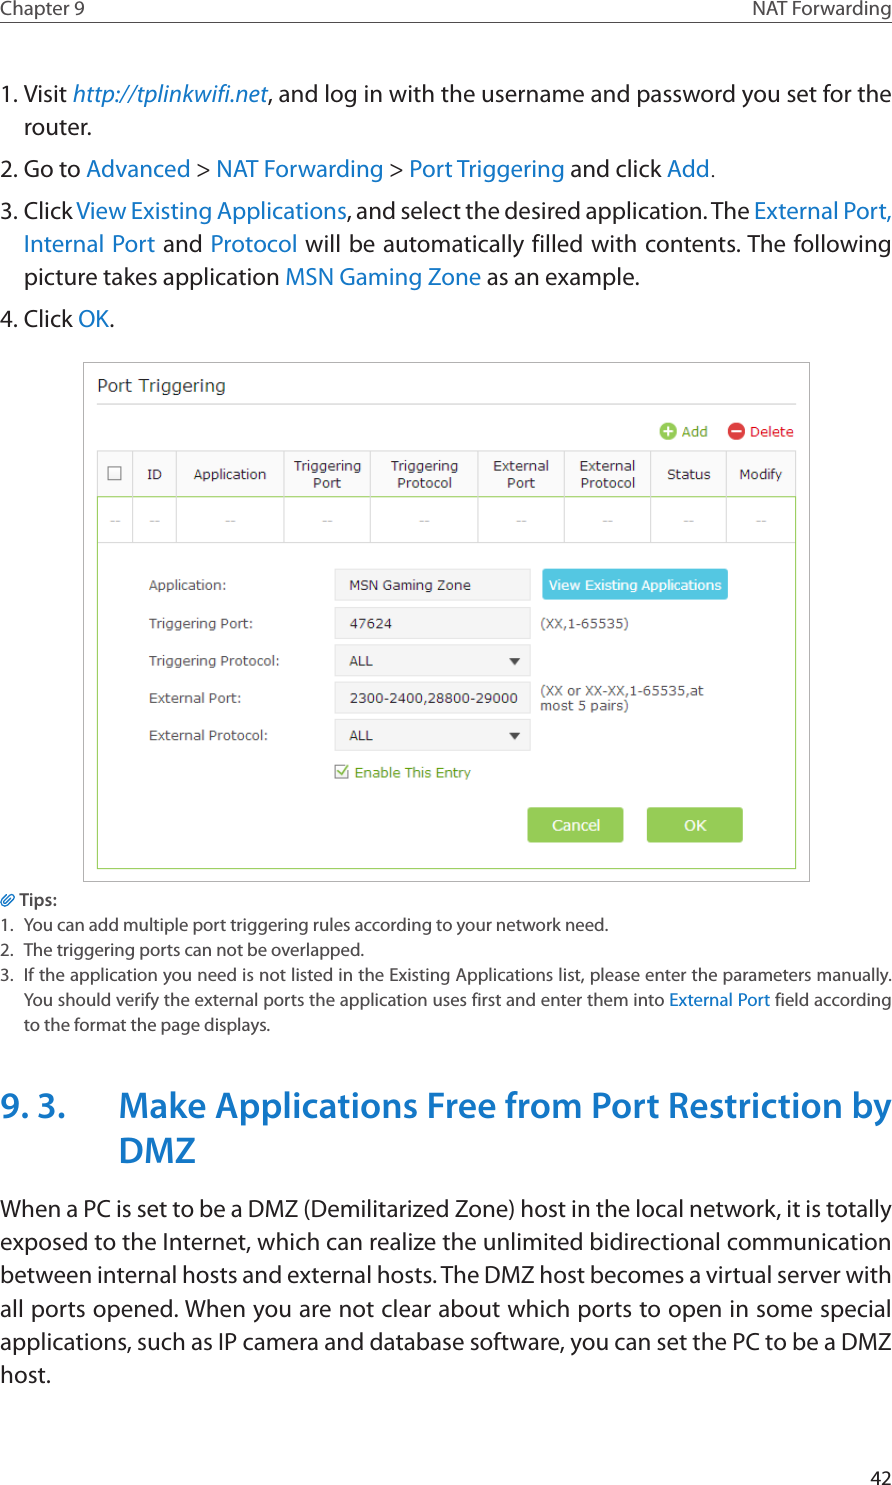 42Chapter 9 NAT Forwarding1. Visit http://tplinkwifi.net, and log in with the username and password you set for the router.2. Go to Advanced &gt; NAT Forwarding &gt; Port Triggering and click Add.3. Click View Existing Applications, and select the desired application. The External Port, Internal Port and Protocol will be automatically filled with contents. The following picture takes application MSN Gaming Zone as an example.4. Click OK.Tips:1.  You can add multiple port triggering rules according to your network need.2.  The triggering ports can not be overlapped.3.  If the application you need is not listed in the Existing Applications list, please enter the parameters manually. You should verify the external ports the application uses first and enter them into External Port field according to the format the page displays.9. 3.  Make Applications Free from Port Restriction by DMZWhen a PC is set to be a DMZ (Demilitarized Zone) host in the local network, it is totally exposed to the Internet, which can realize the unlimited bidirectional communication between internal hosts and external hosts. The DMZ host becomes a virtual server with all ports opened. When you are not clear about which ports to open in some special applications, such as IP camera and database software, you can set the PC to be a DMZ host.